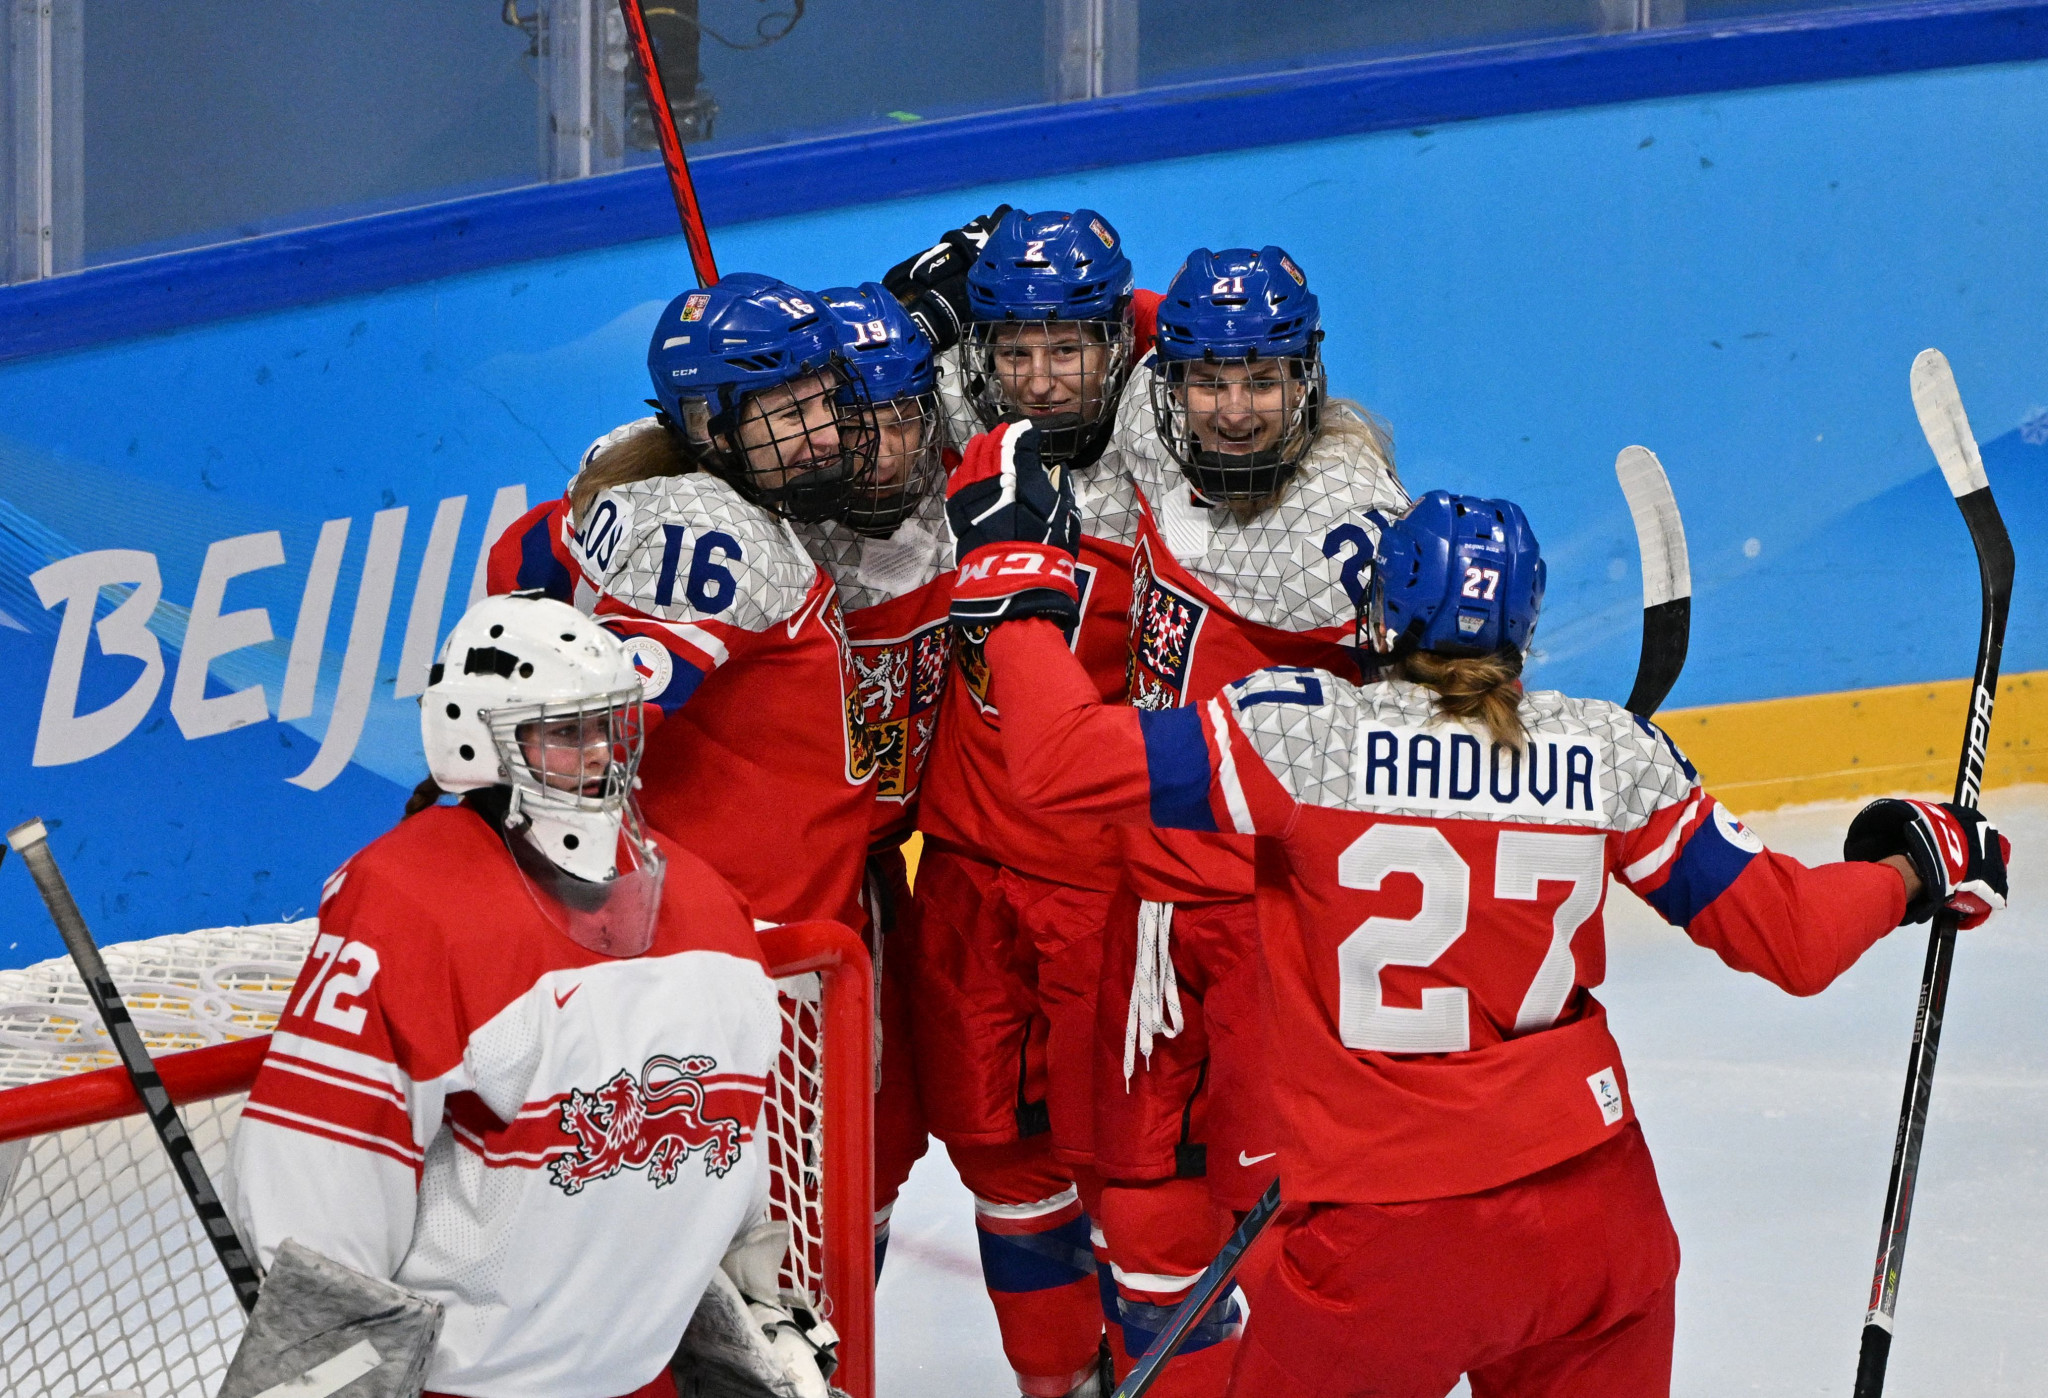 Czech Republic clinched an overtime win over Japan ©Getty Images